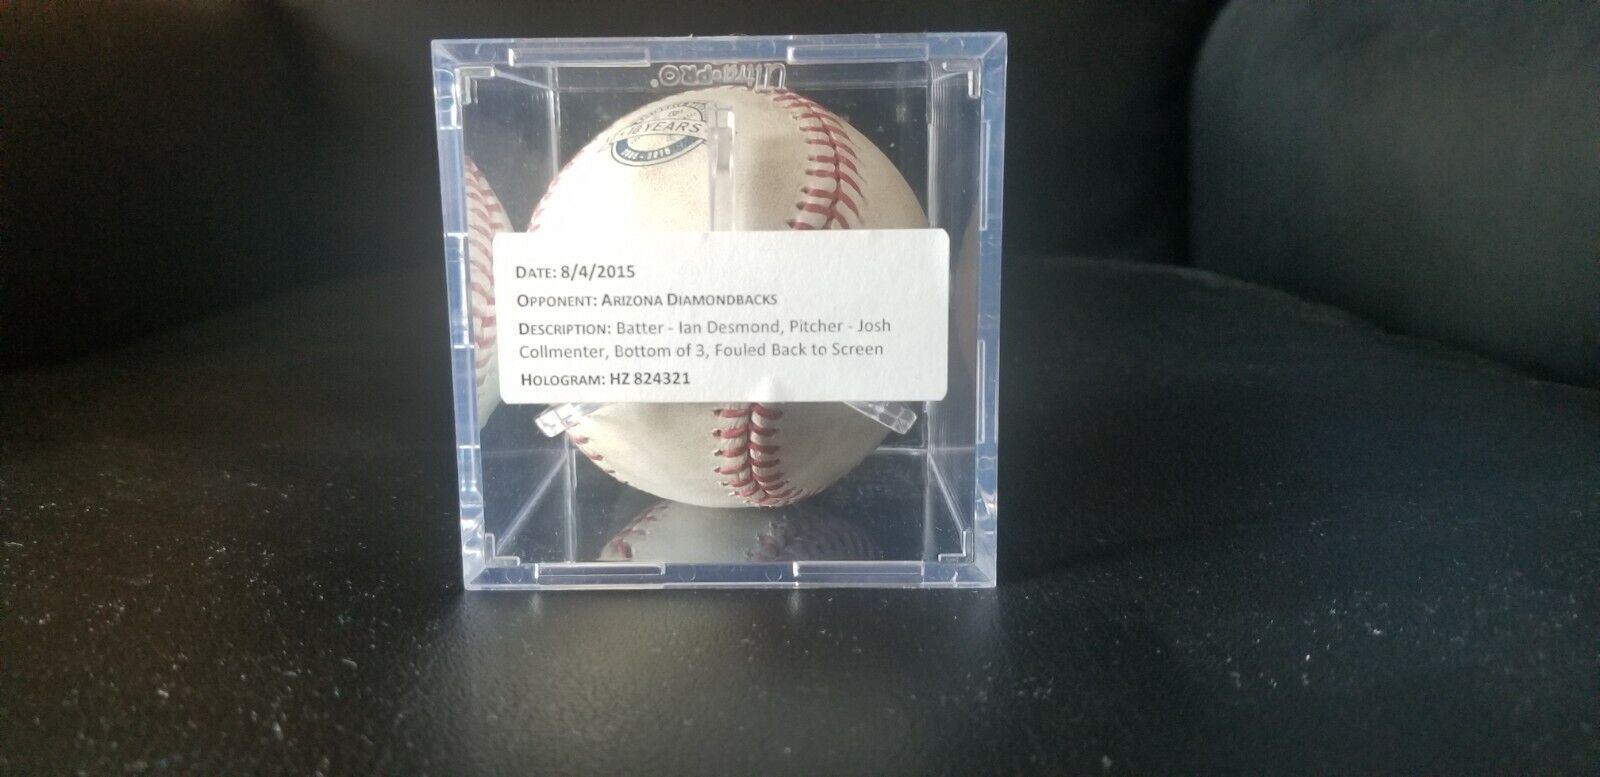 MLB Game Used Baseball with Provenance - August 4, 2015